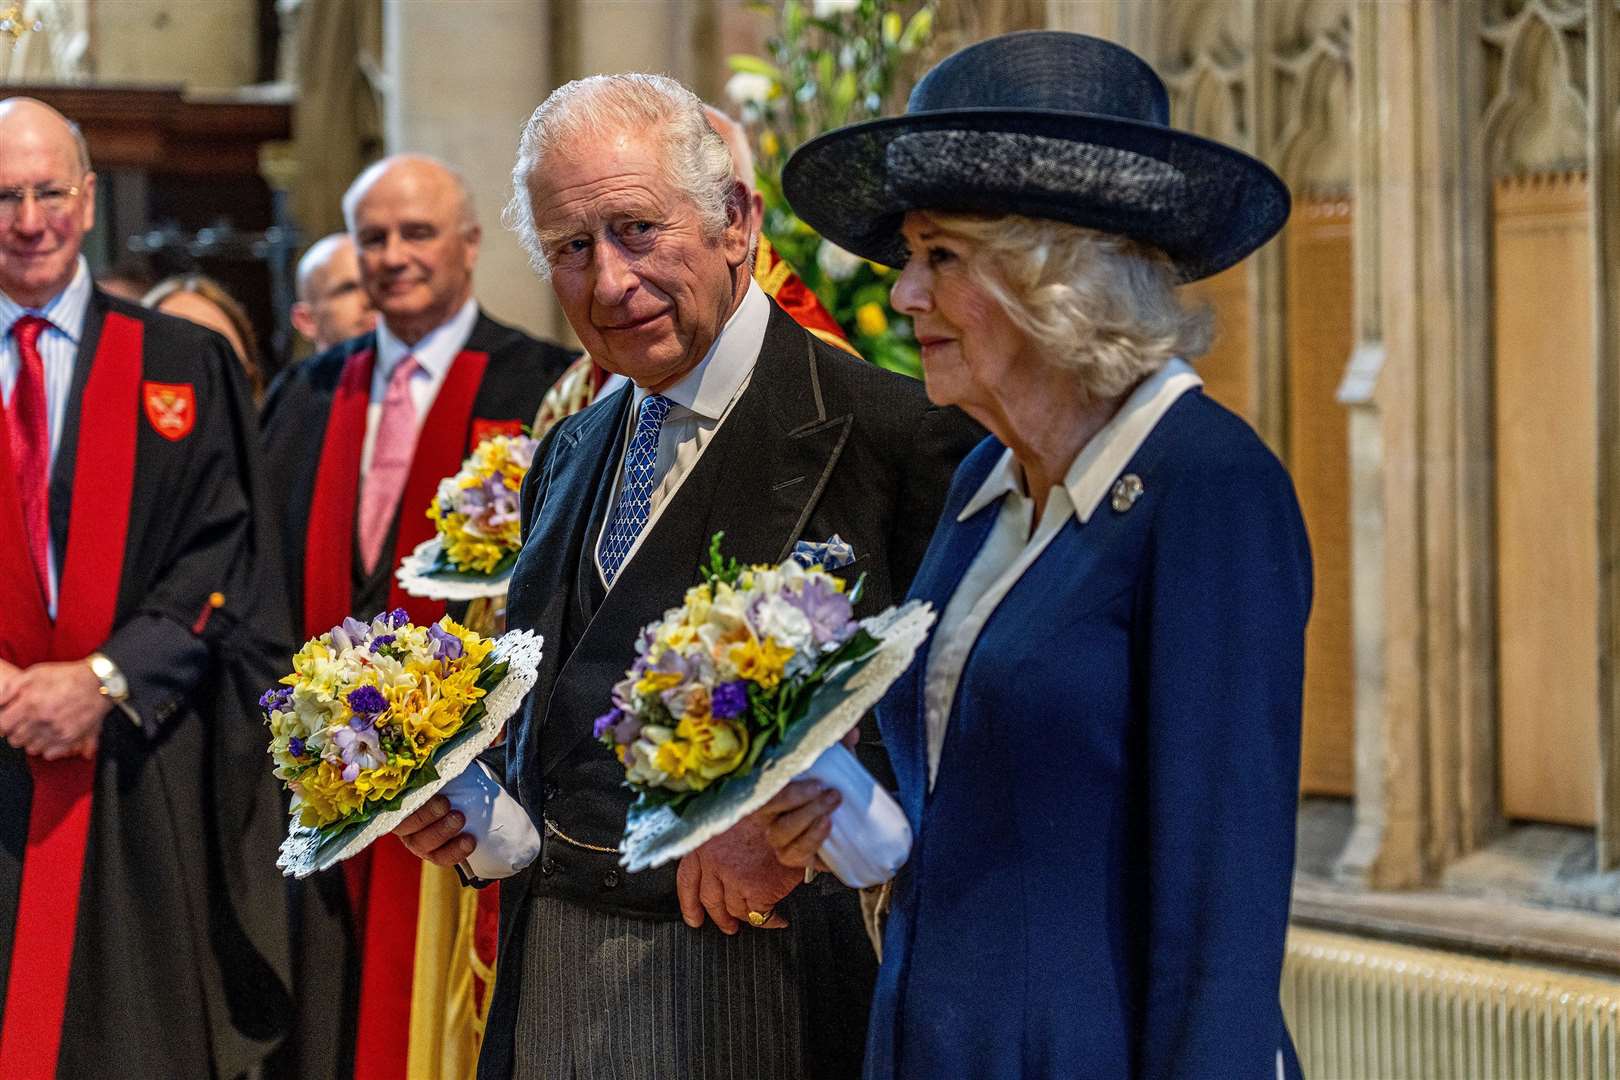 The King and the Queen Consort attending the Royal Maundy Service at York Minster (Charlotte Graham/Daily Telegraph/PA)